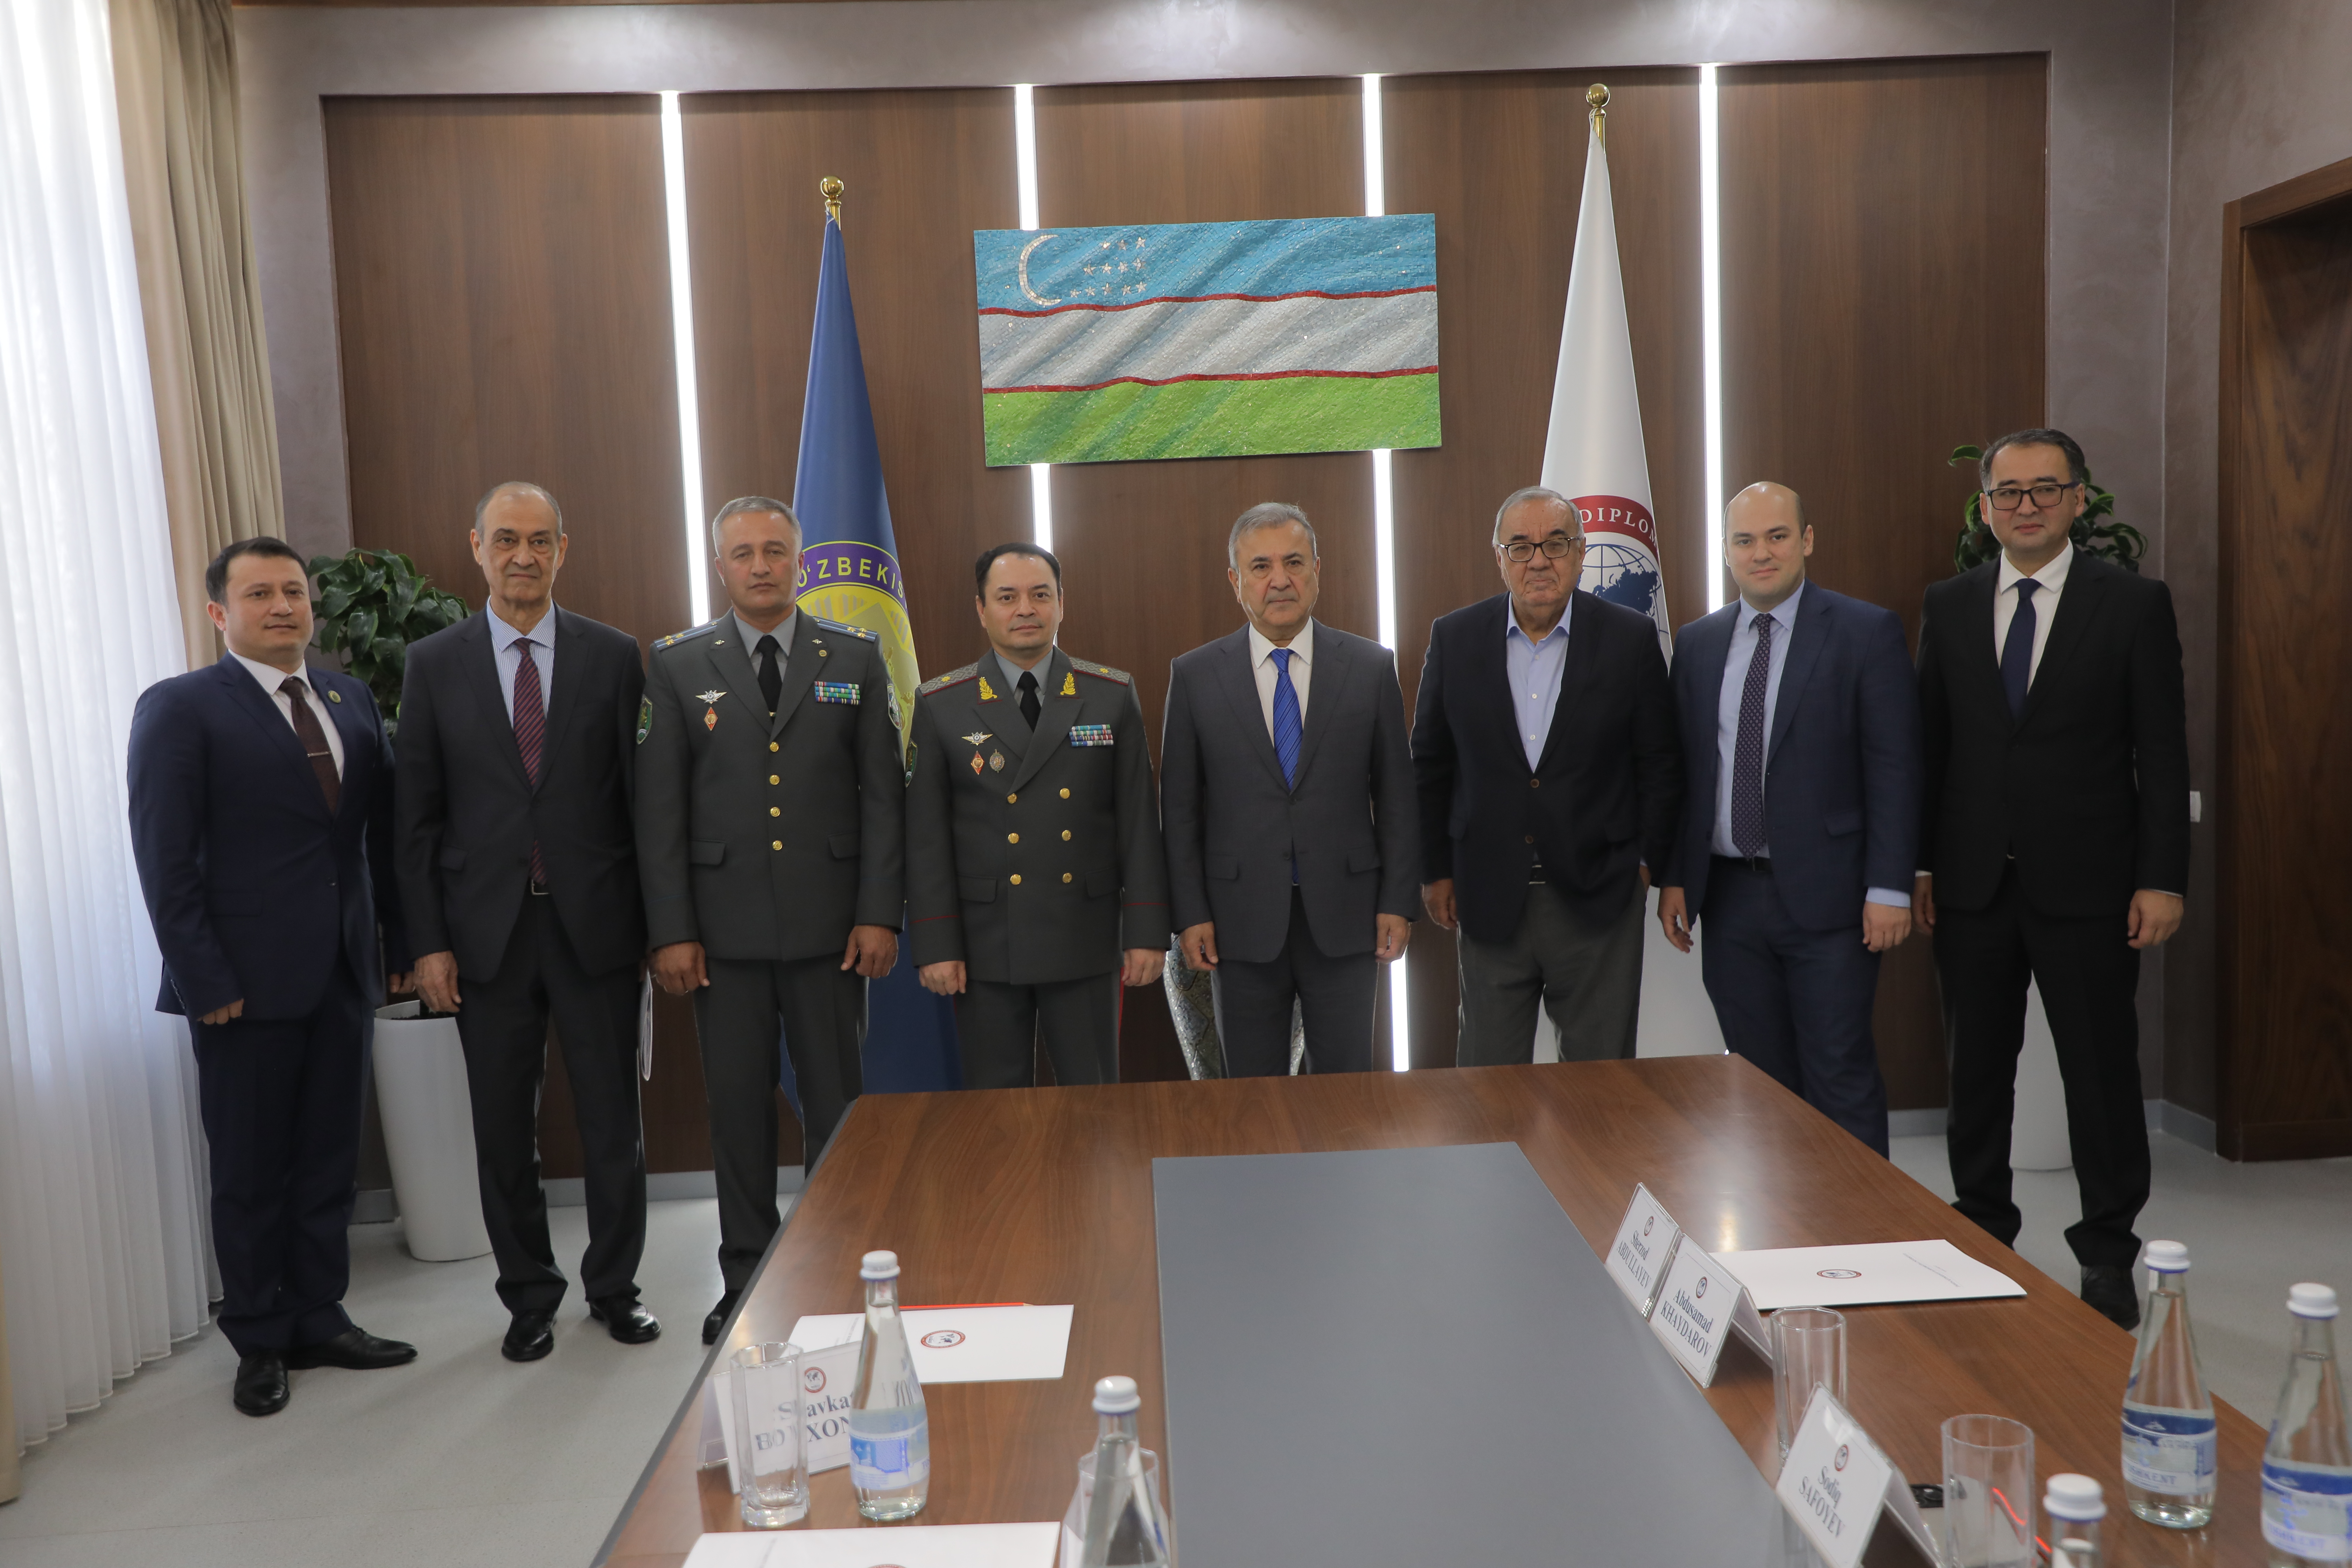 A memorandum of cooperation was signed with the Ministry of Defense of the Republic of Uzbekistan